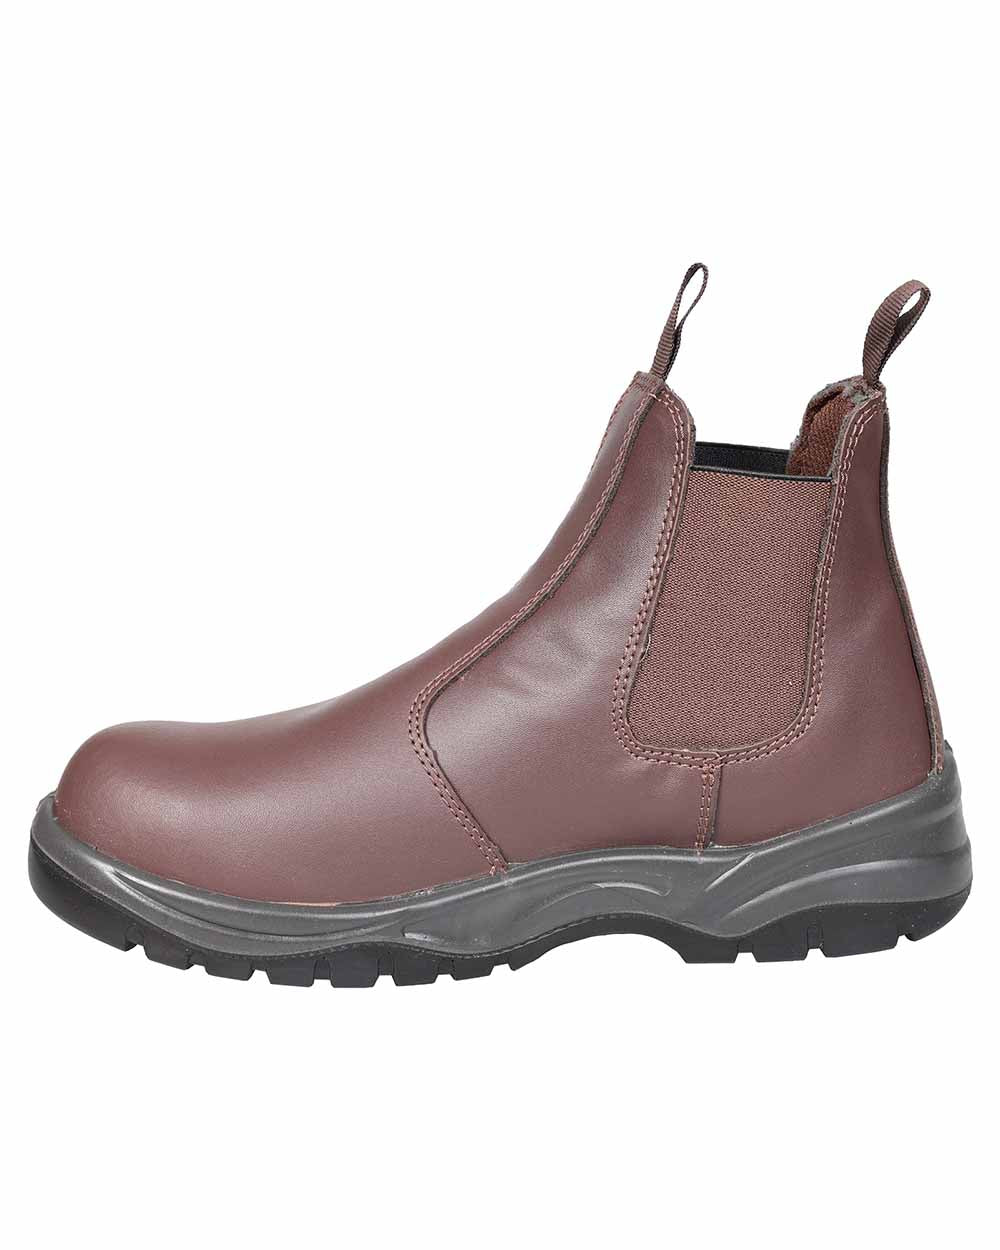 Fort Nelson Safety Dealer Boots Steel toe 